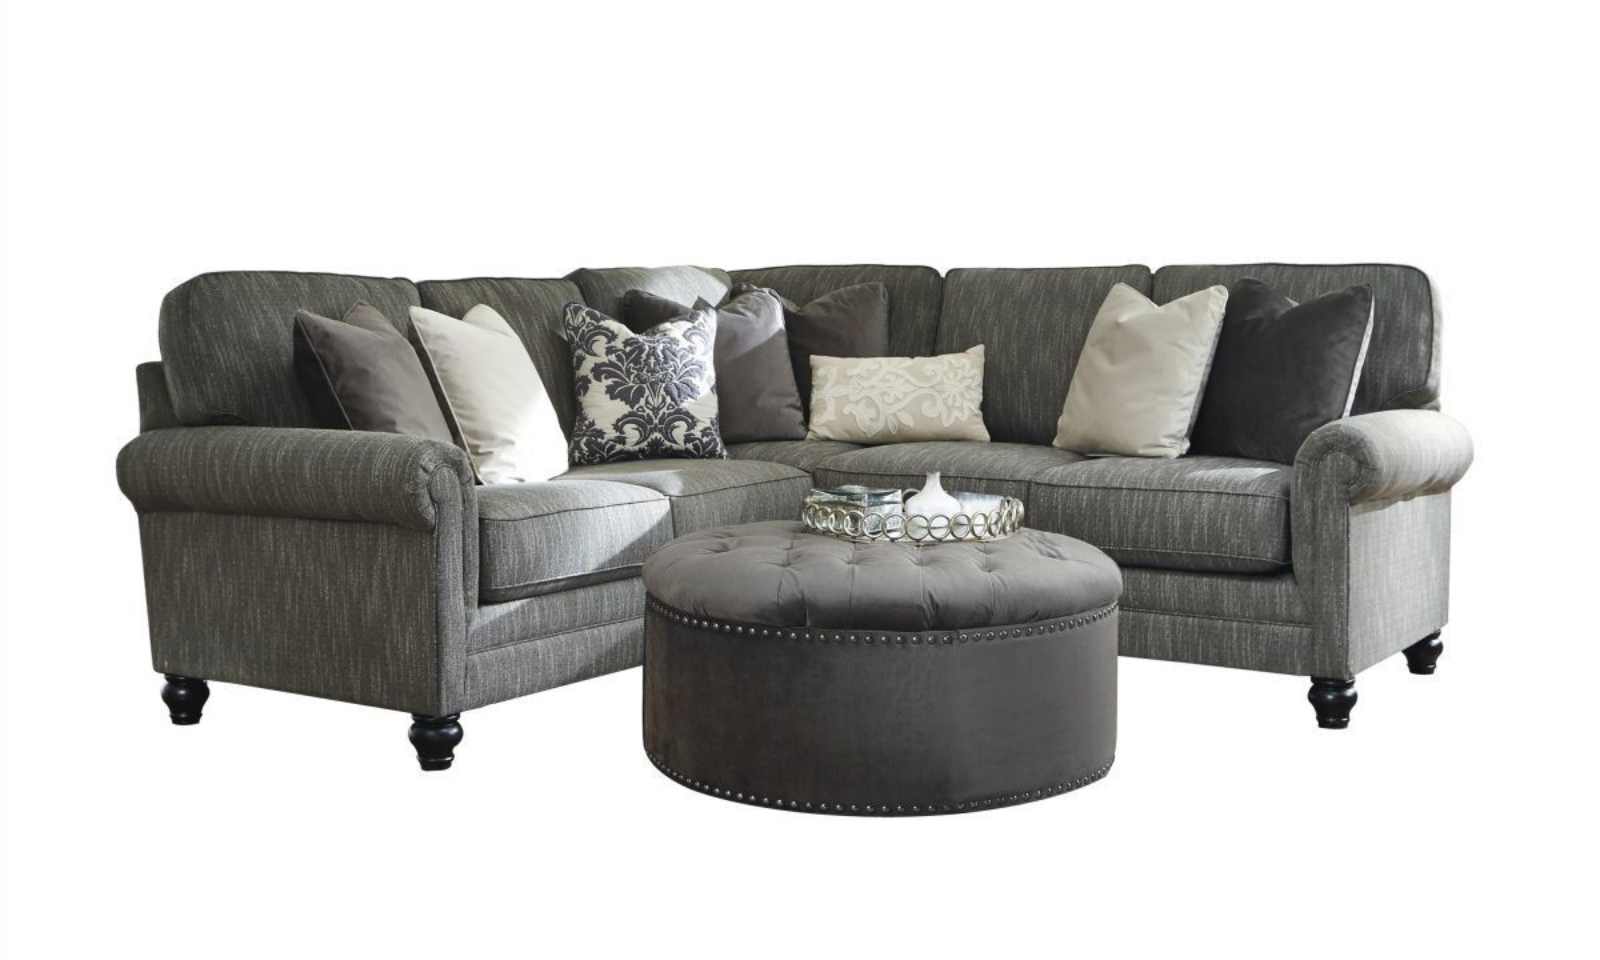 Picture of Kittredge Sectional with Ottoman